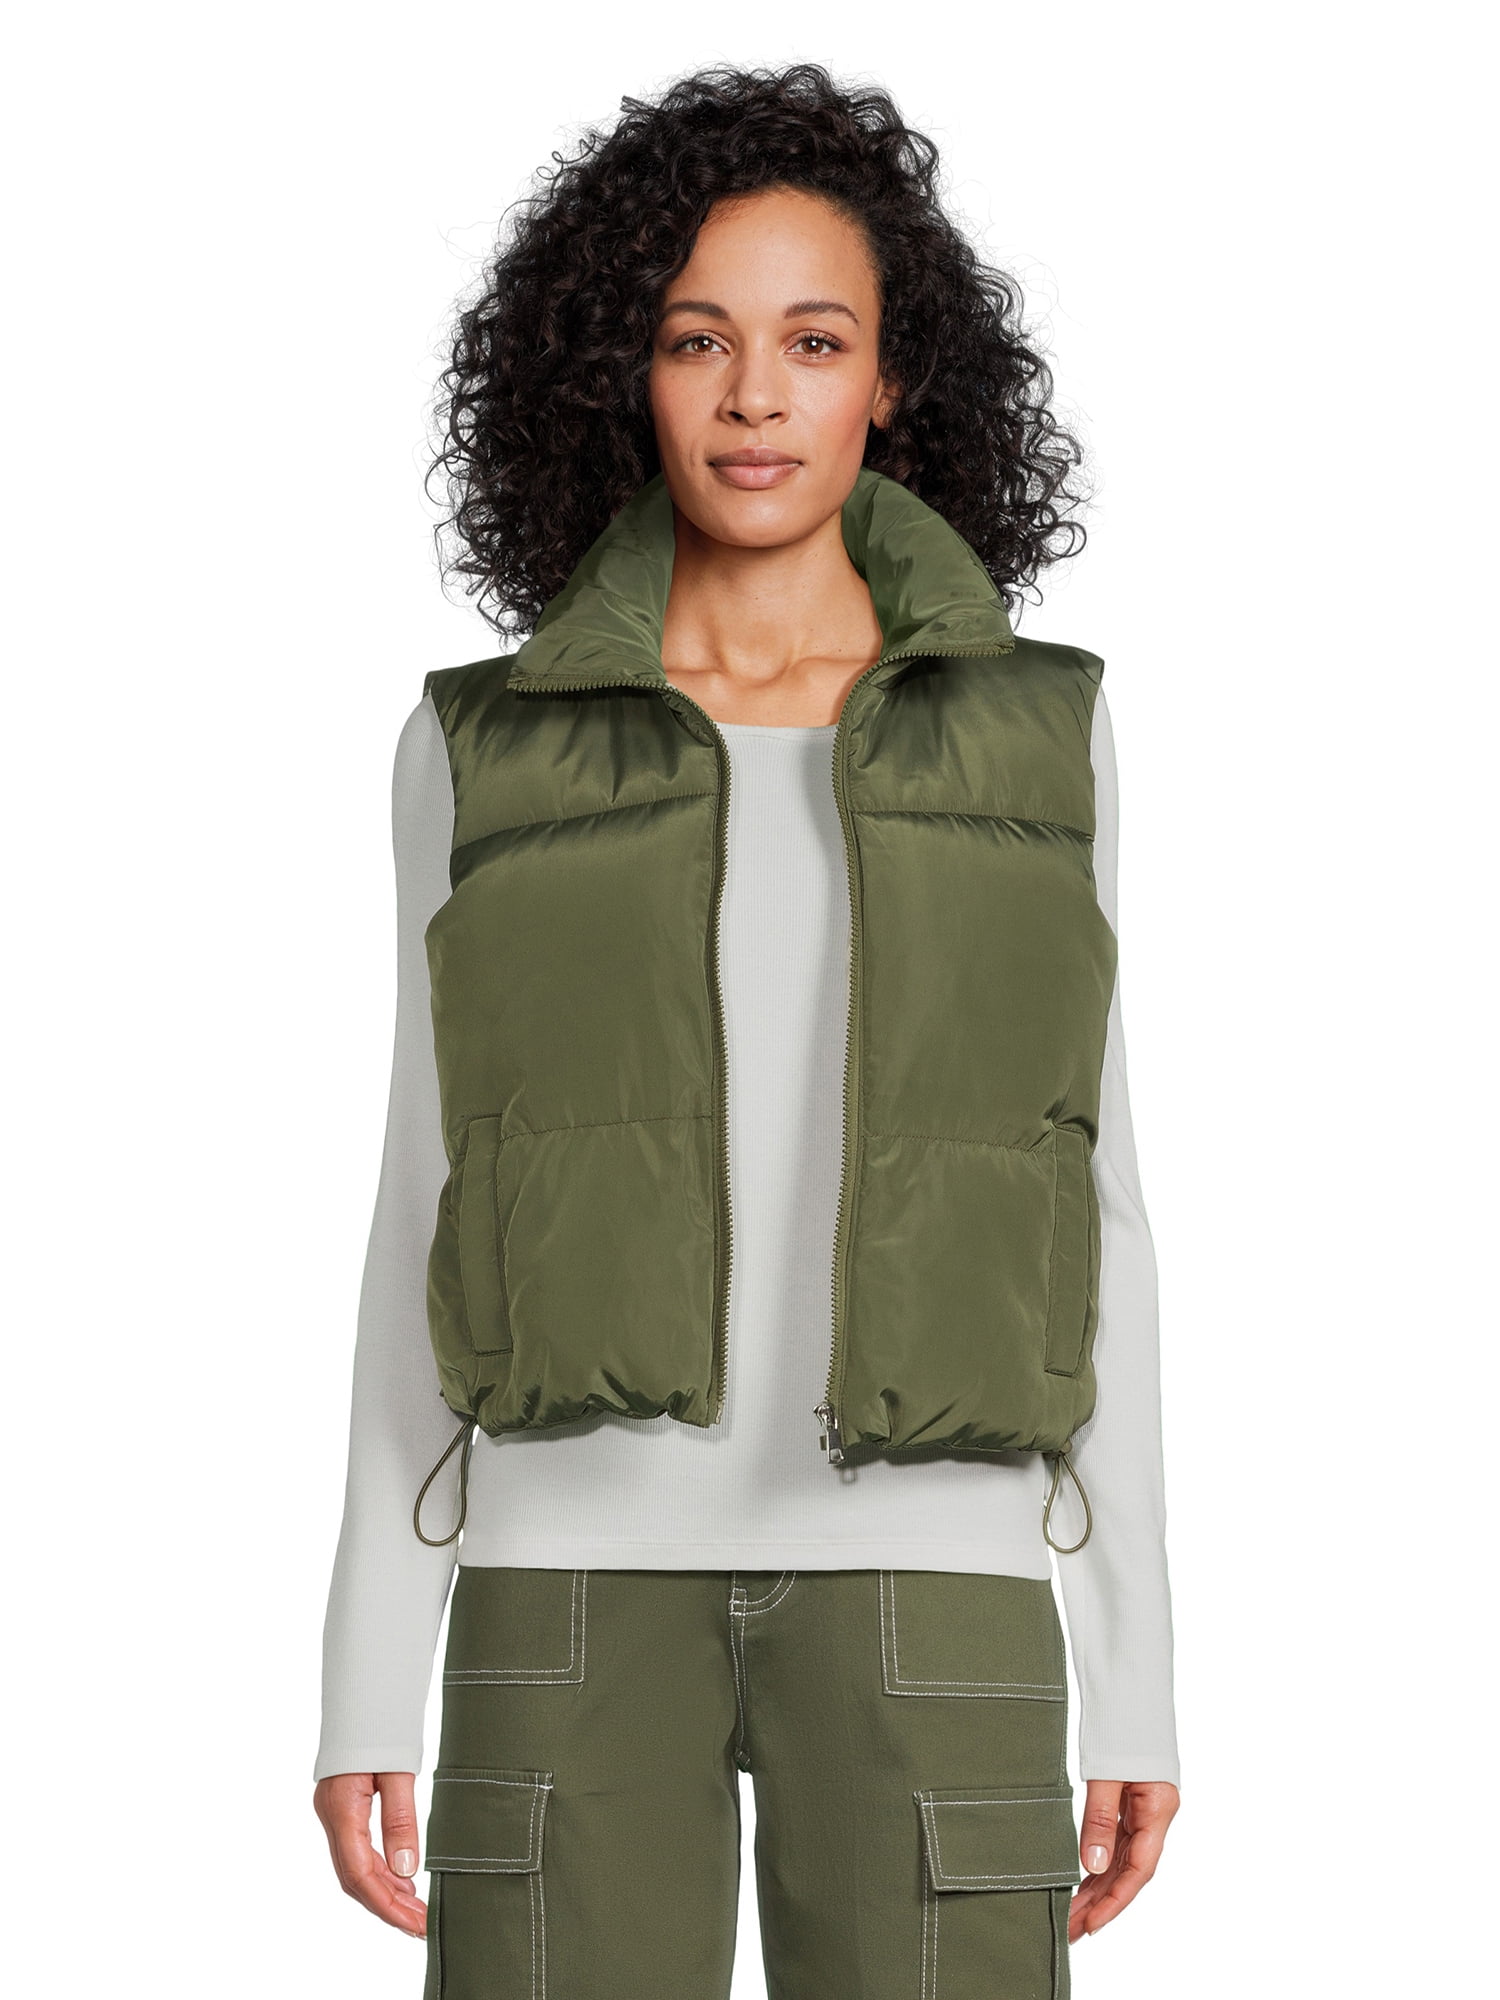 Liv & Lottie Juniors Cropped Puffer Vest with Pockets, Sizes S-XL 